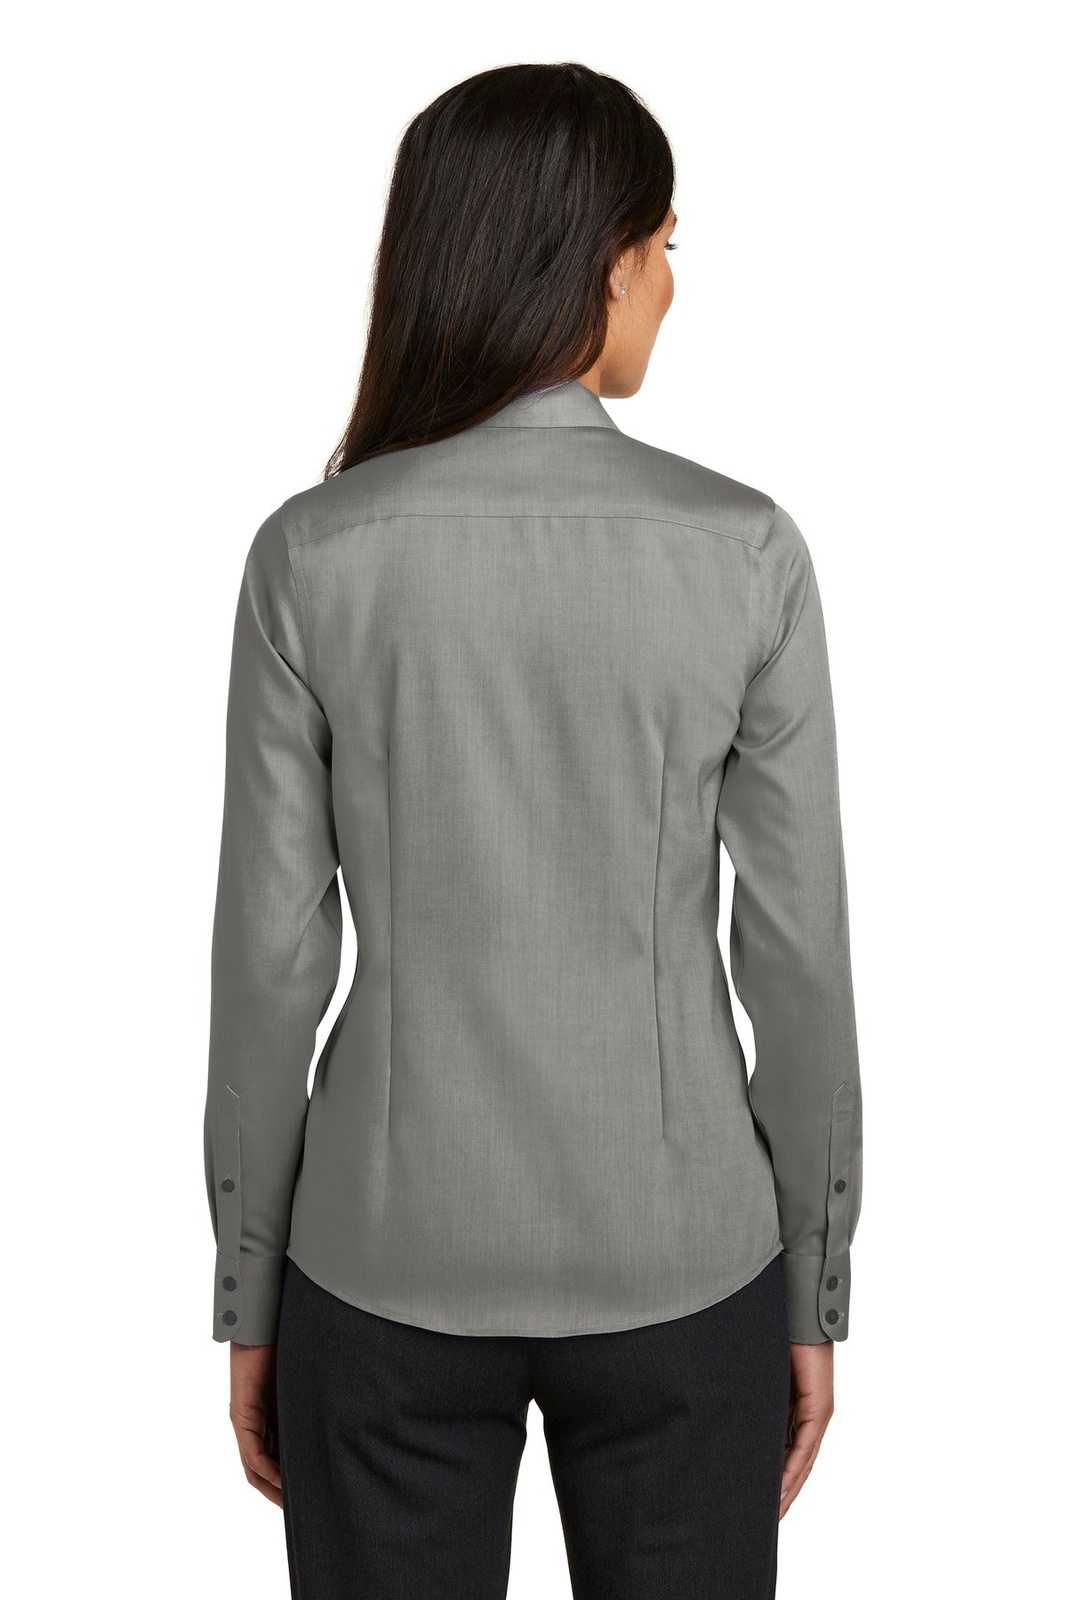 Red House RH250 Ladies Pinpoint Oxford Non-Iron Shirt - Charcoal - HIT a Double - 1